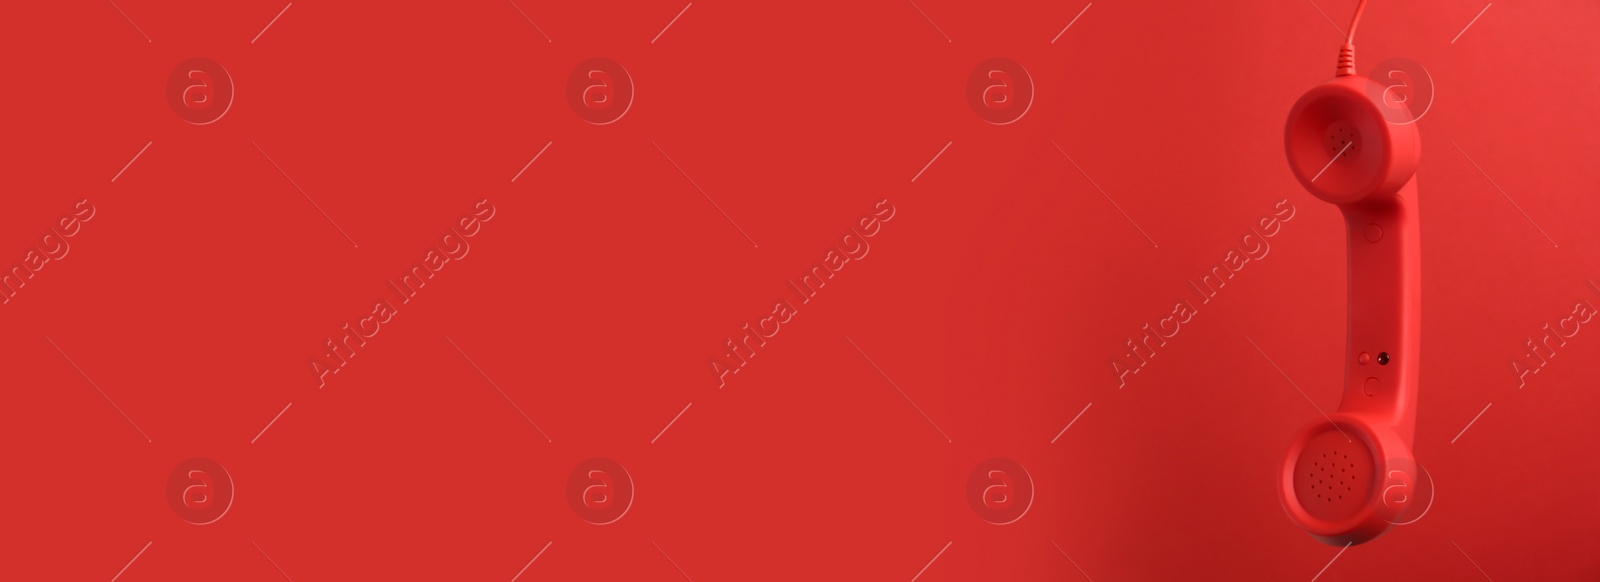 Image of Hotline service. Telephone receiver and space for text on red background, banner design